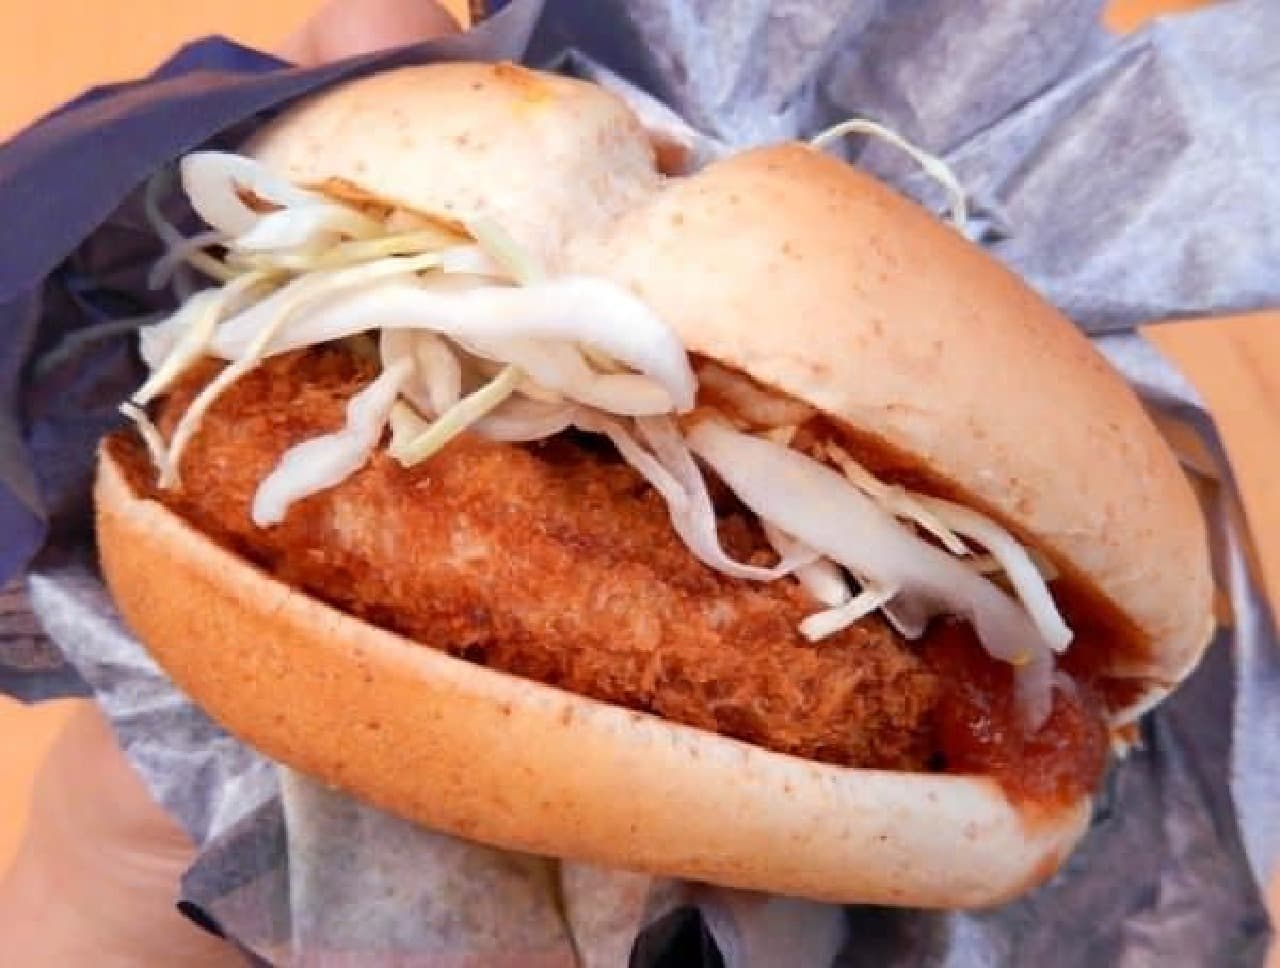 Tonkatsu burger that looks like Western food even though it is Japanese